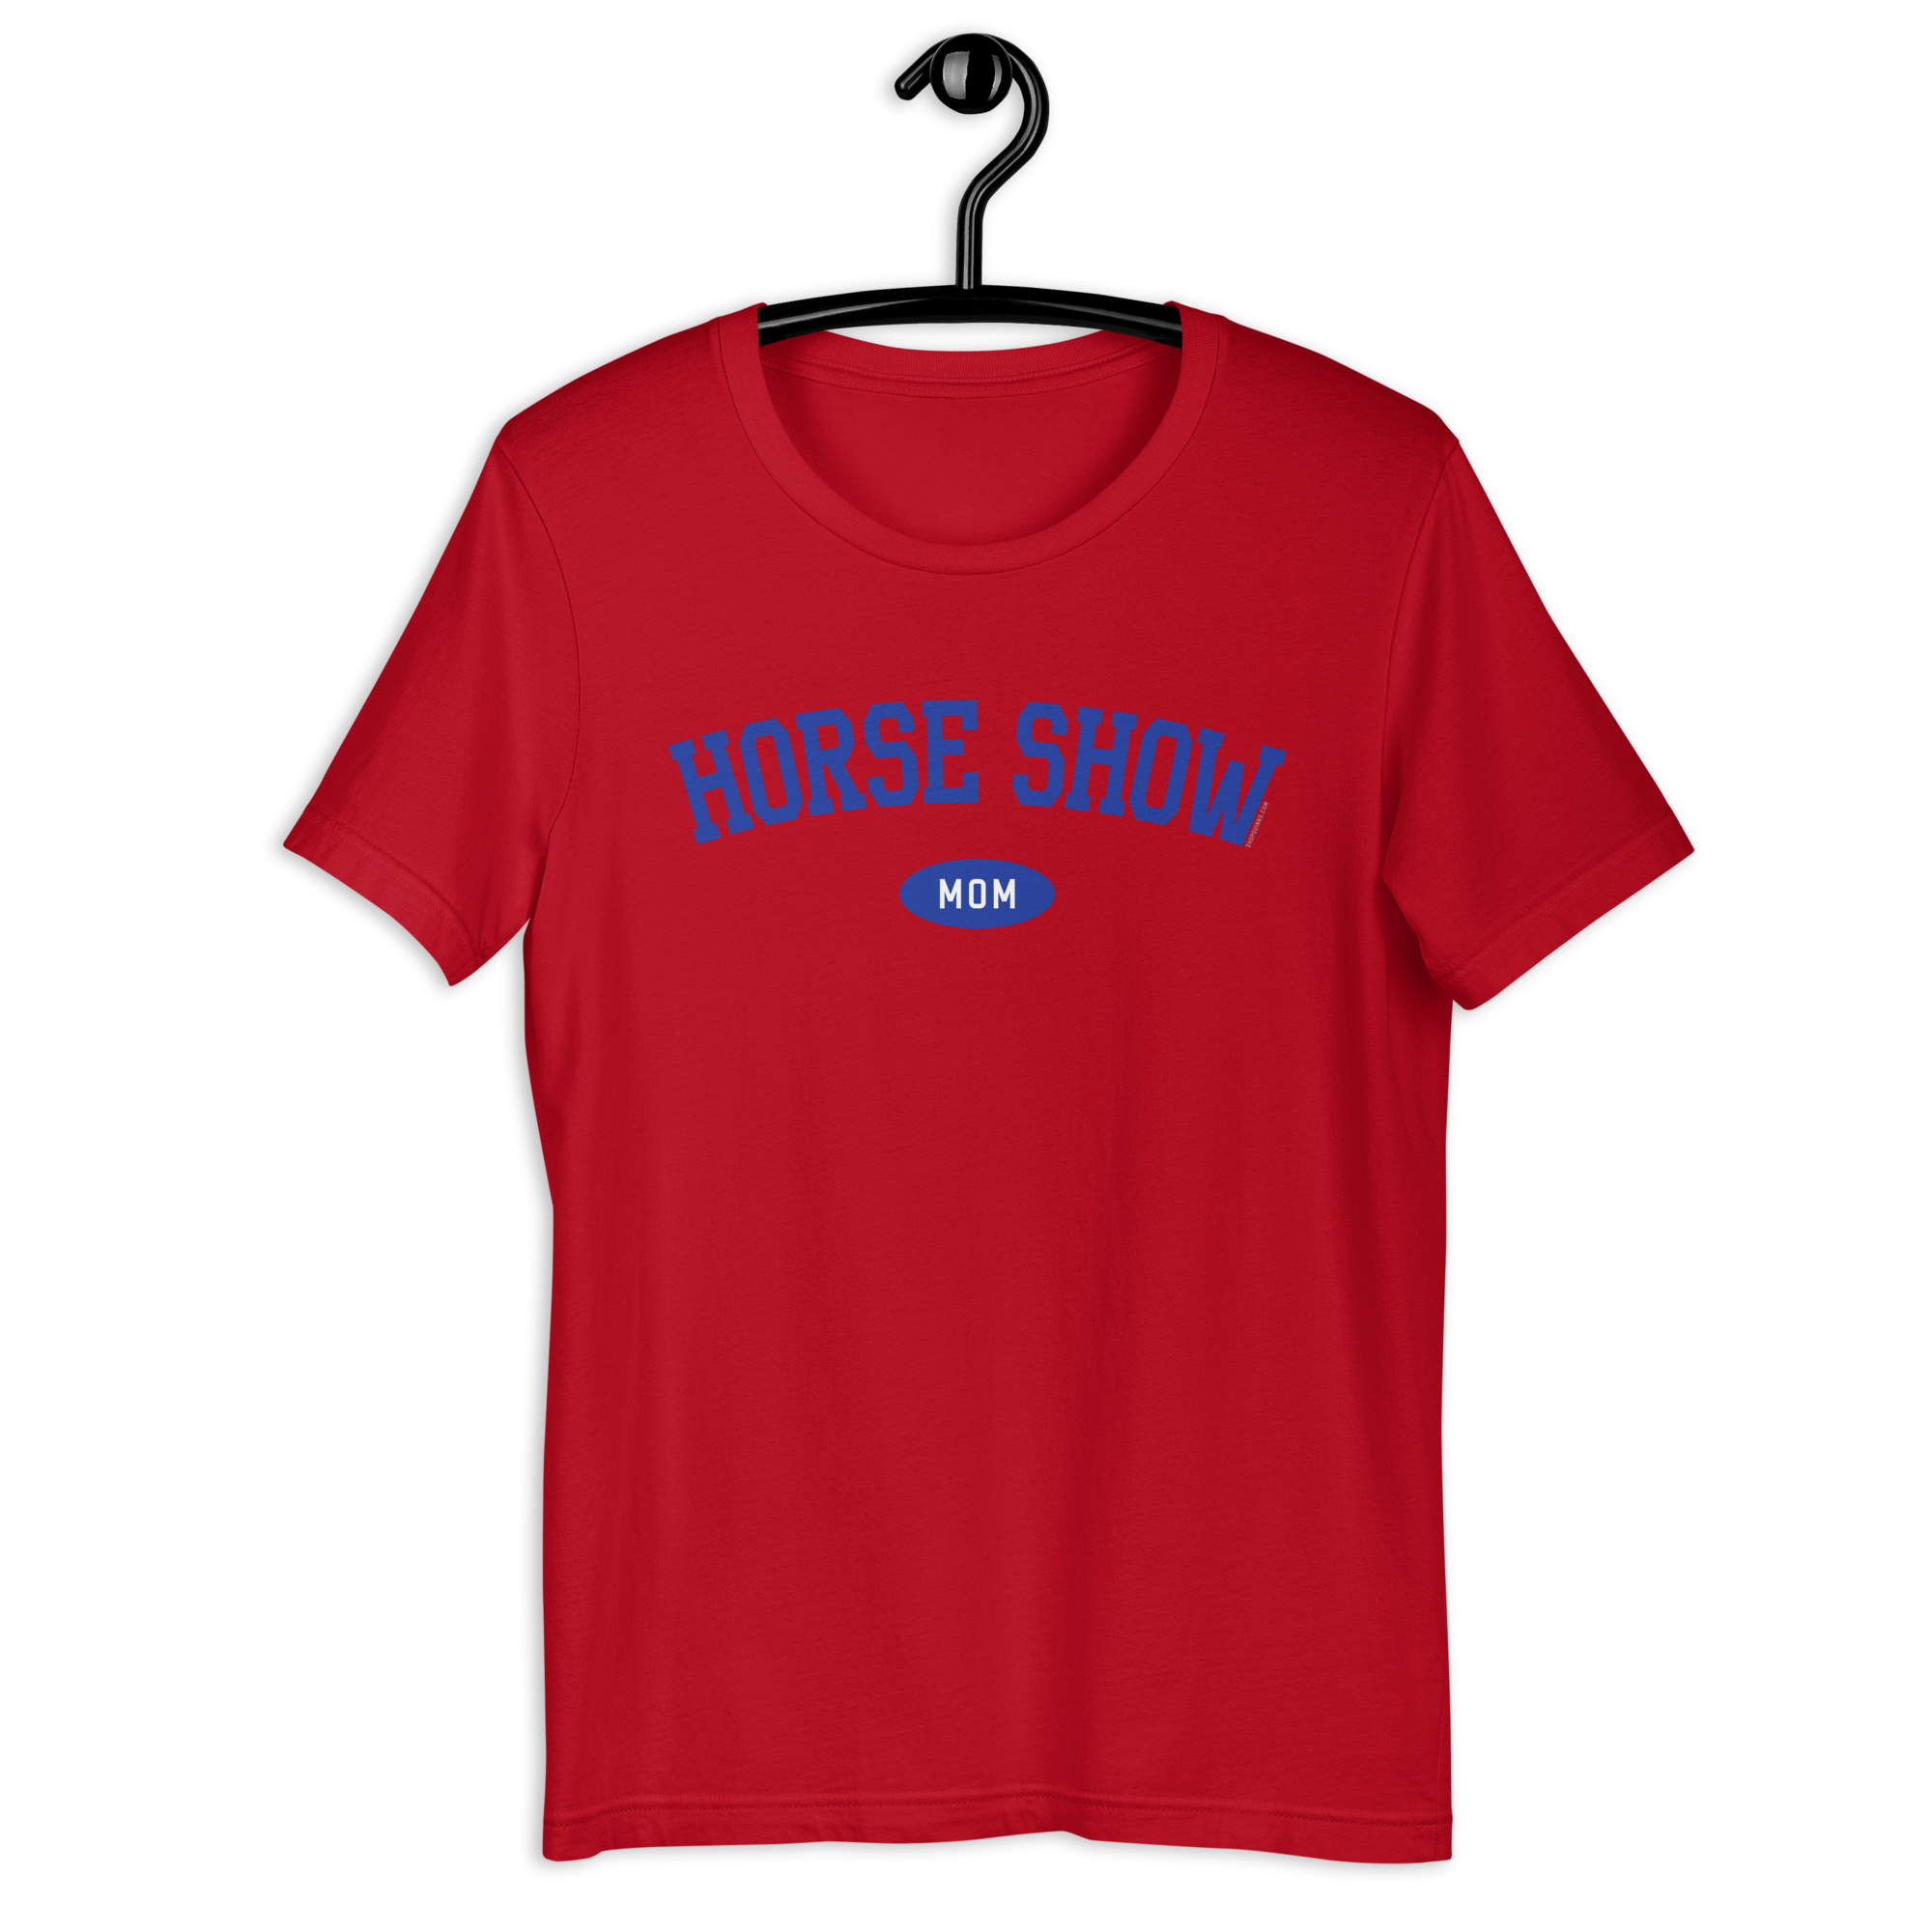 Horse Show Mom Graphic Tee